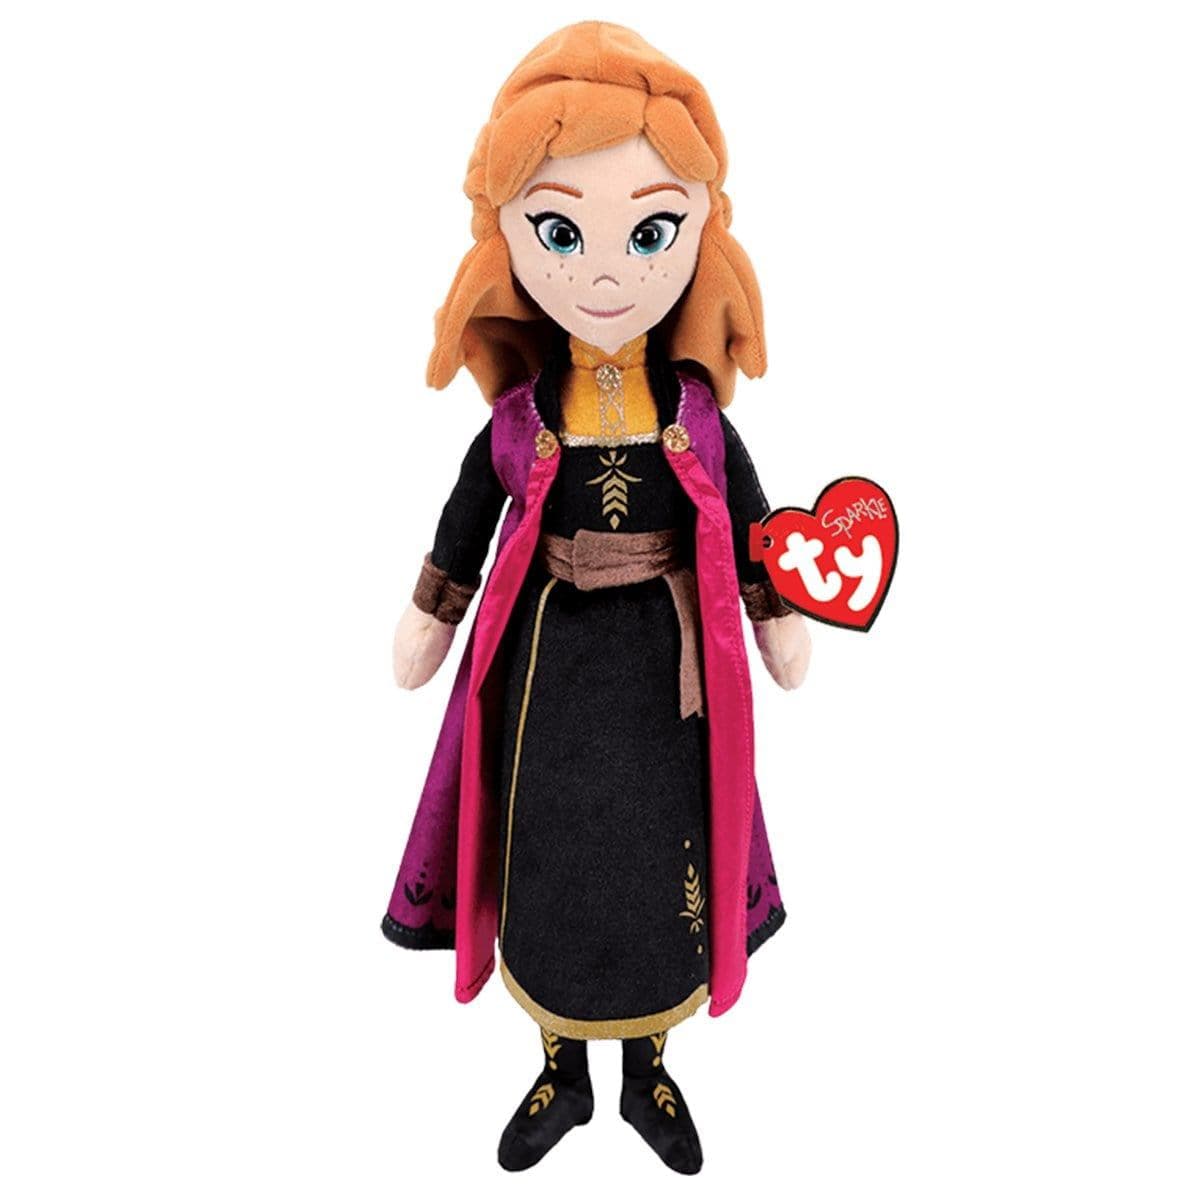 Buy Plushes Frozen 2 - Anna - Medium sold at Party Expert